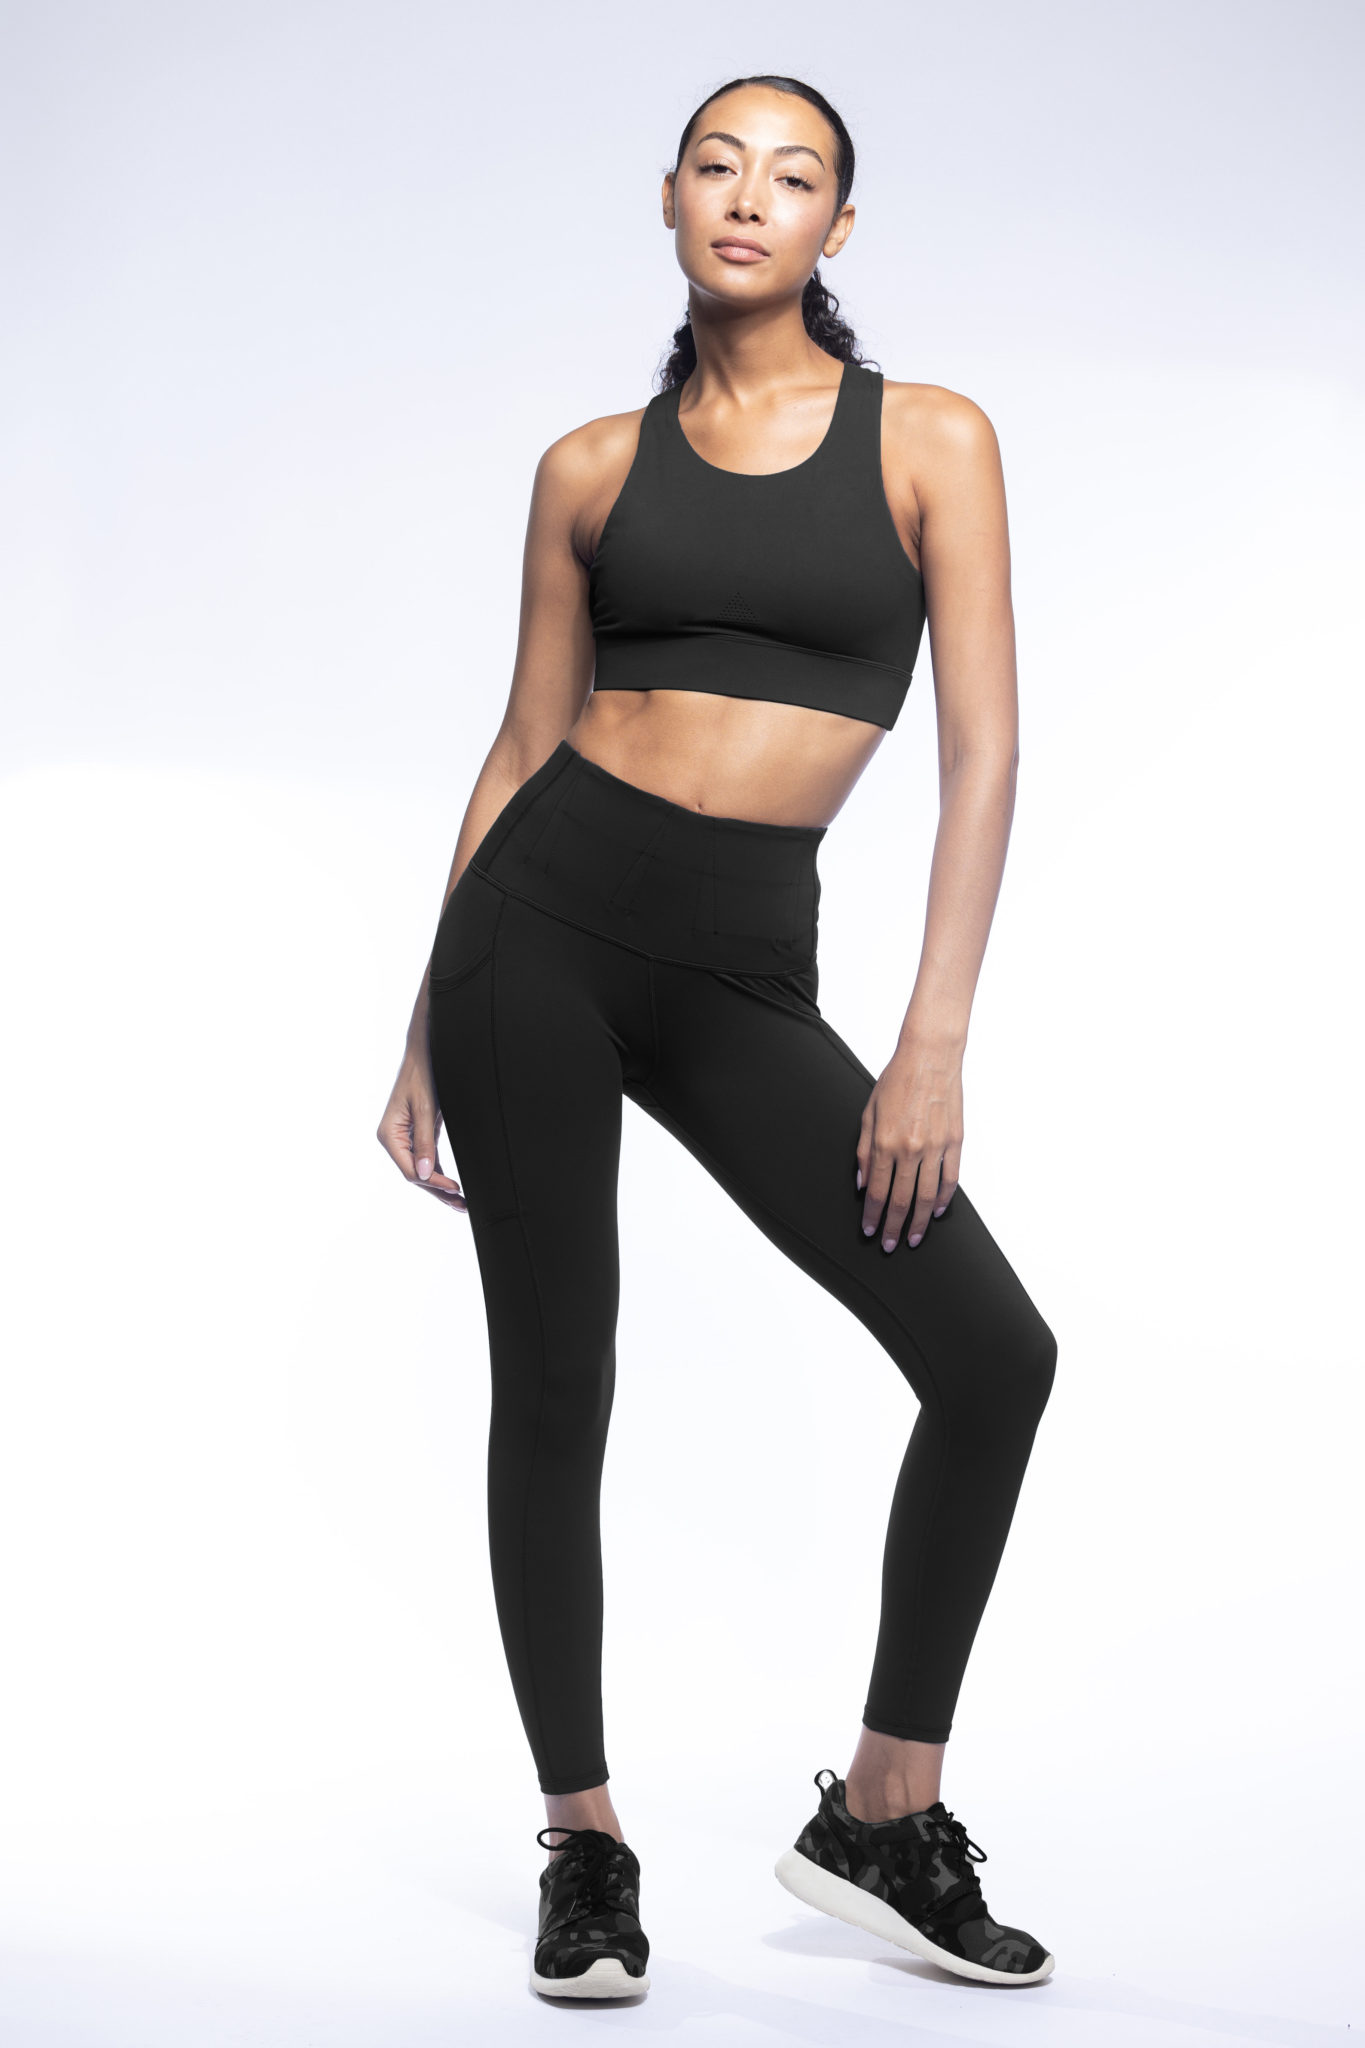 Concealed Carry Leggings by Alexo Athletica Review [Prep 365